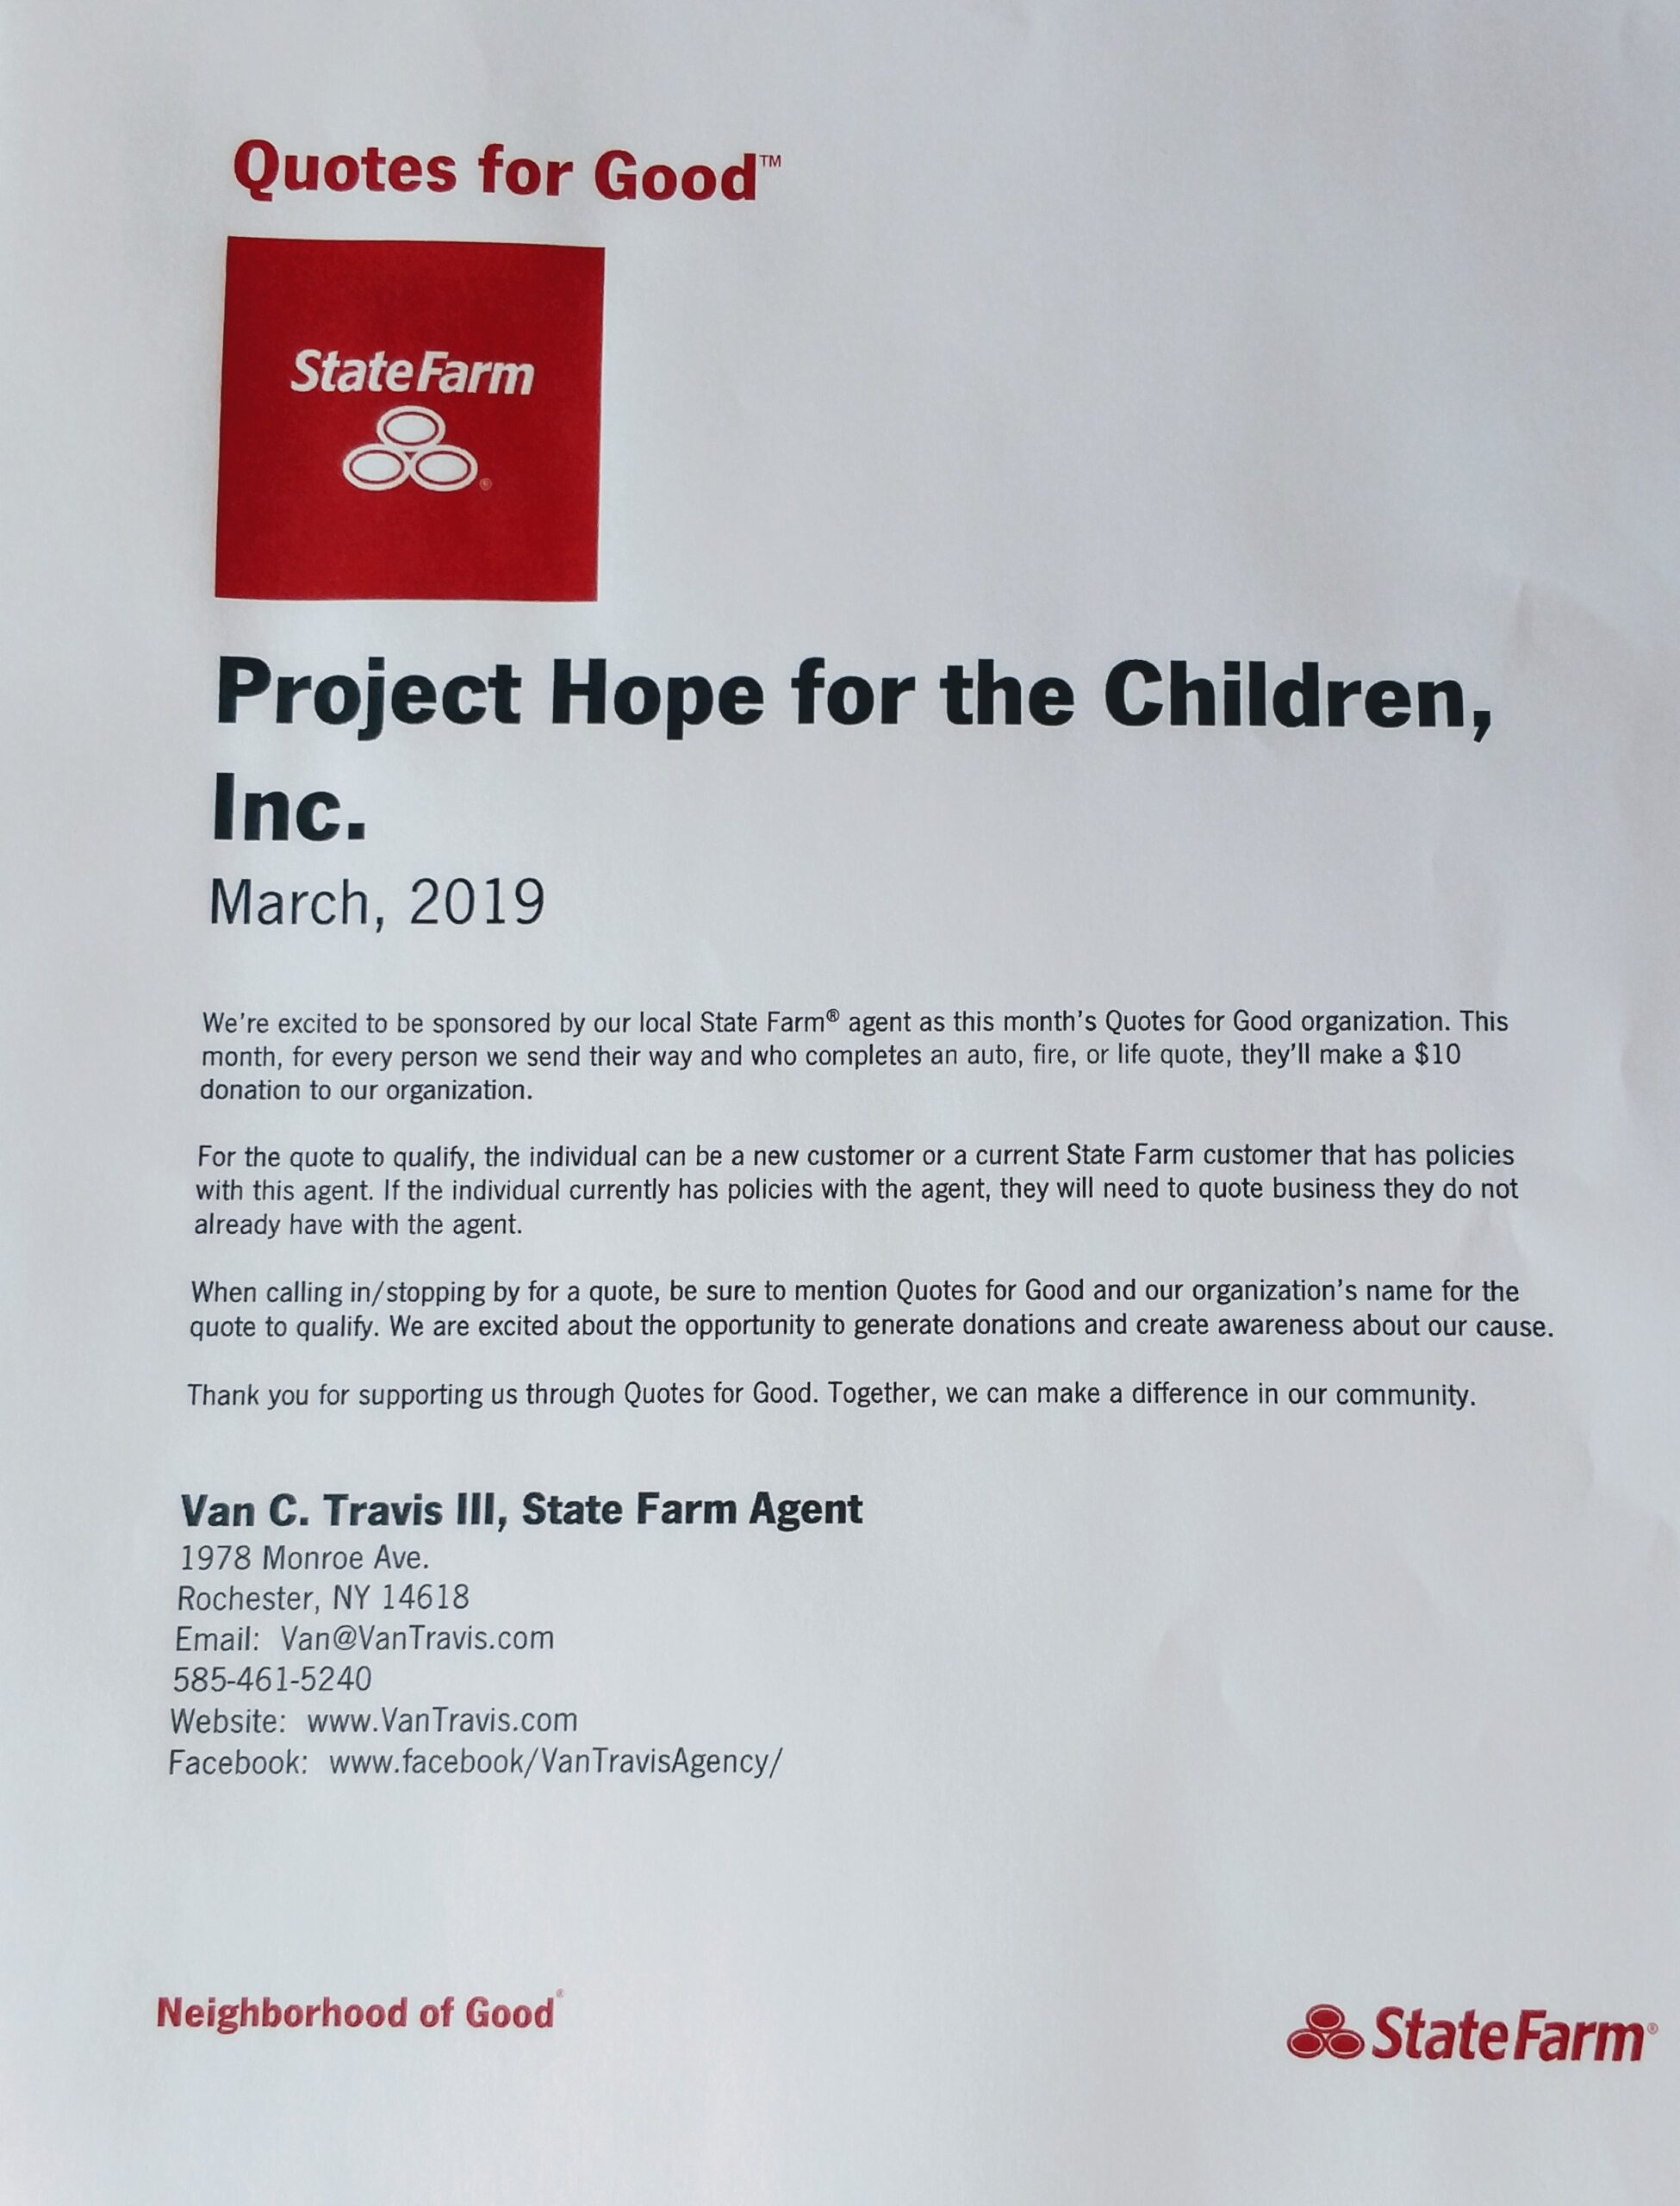 Quotes for Good - State Farm Project Hope for the Children, Inc. March 2019